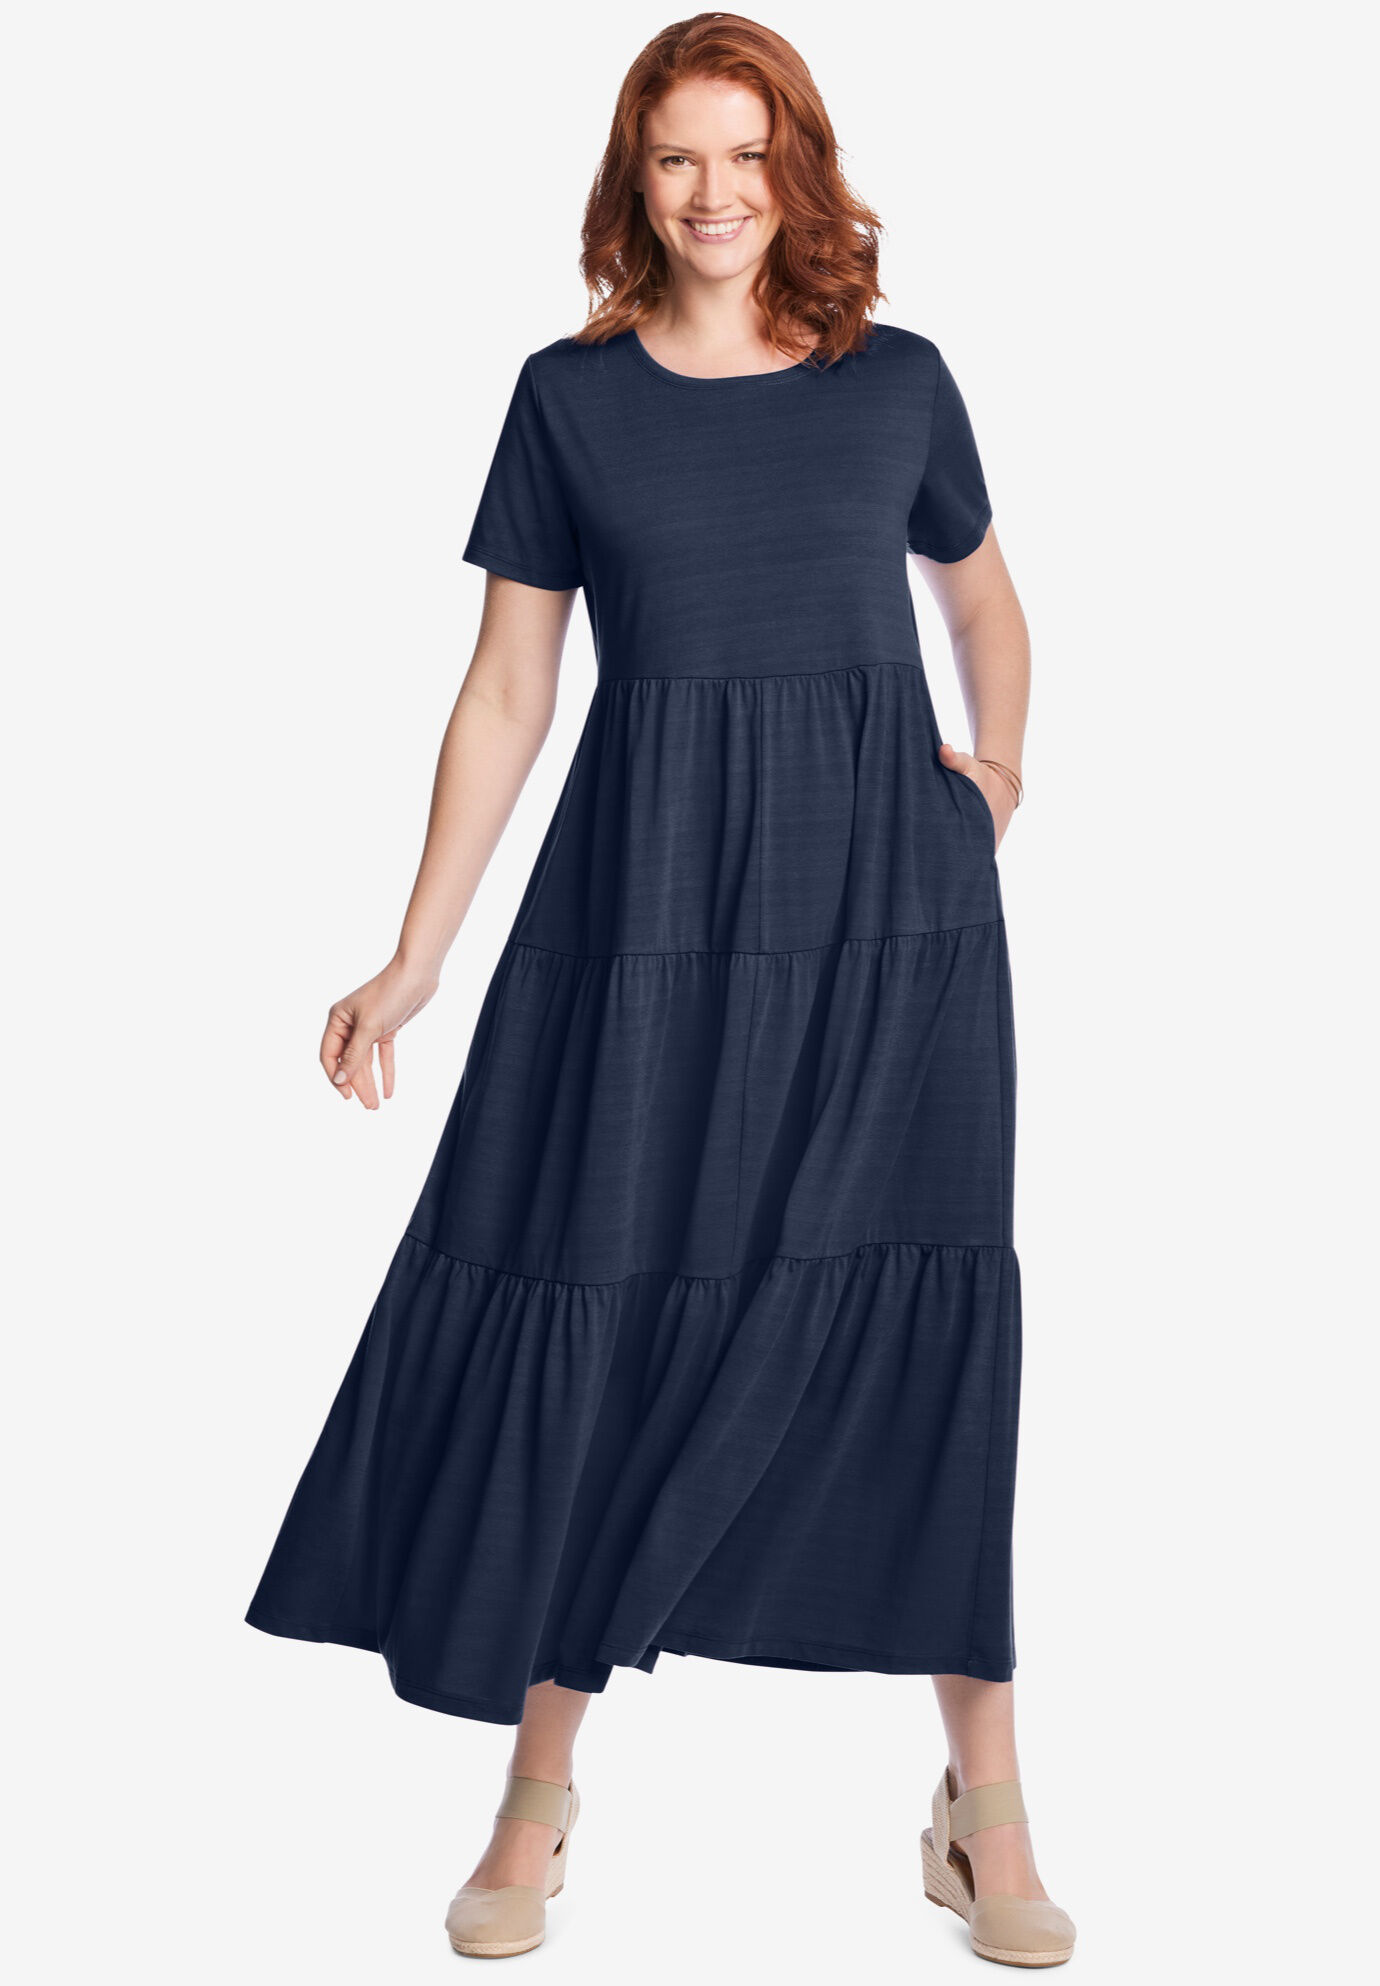 Short-Sleeve Tiered Dress | Woman Within